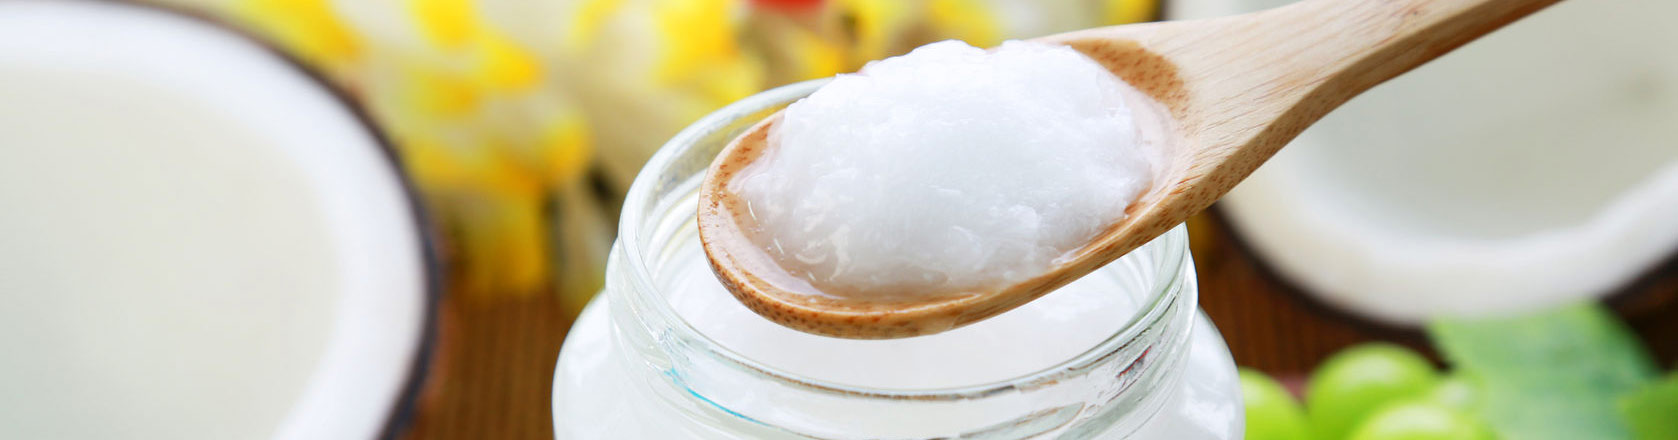 eating coconut oil - good or bad for you?